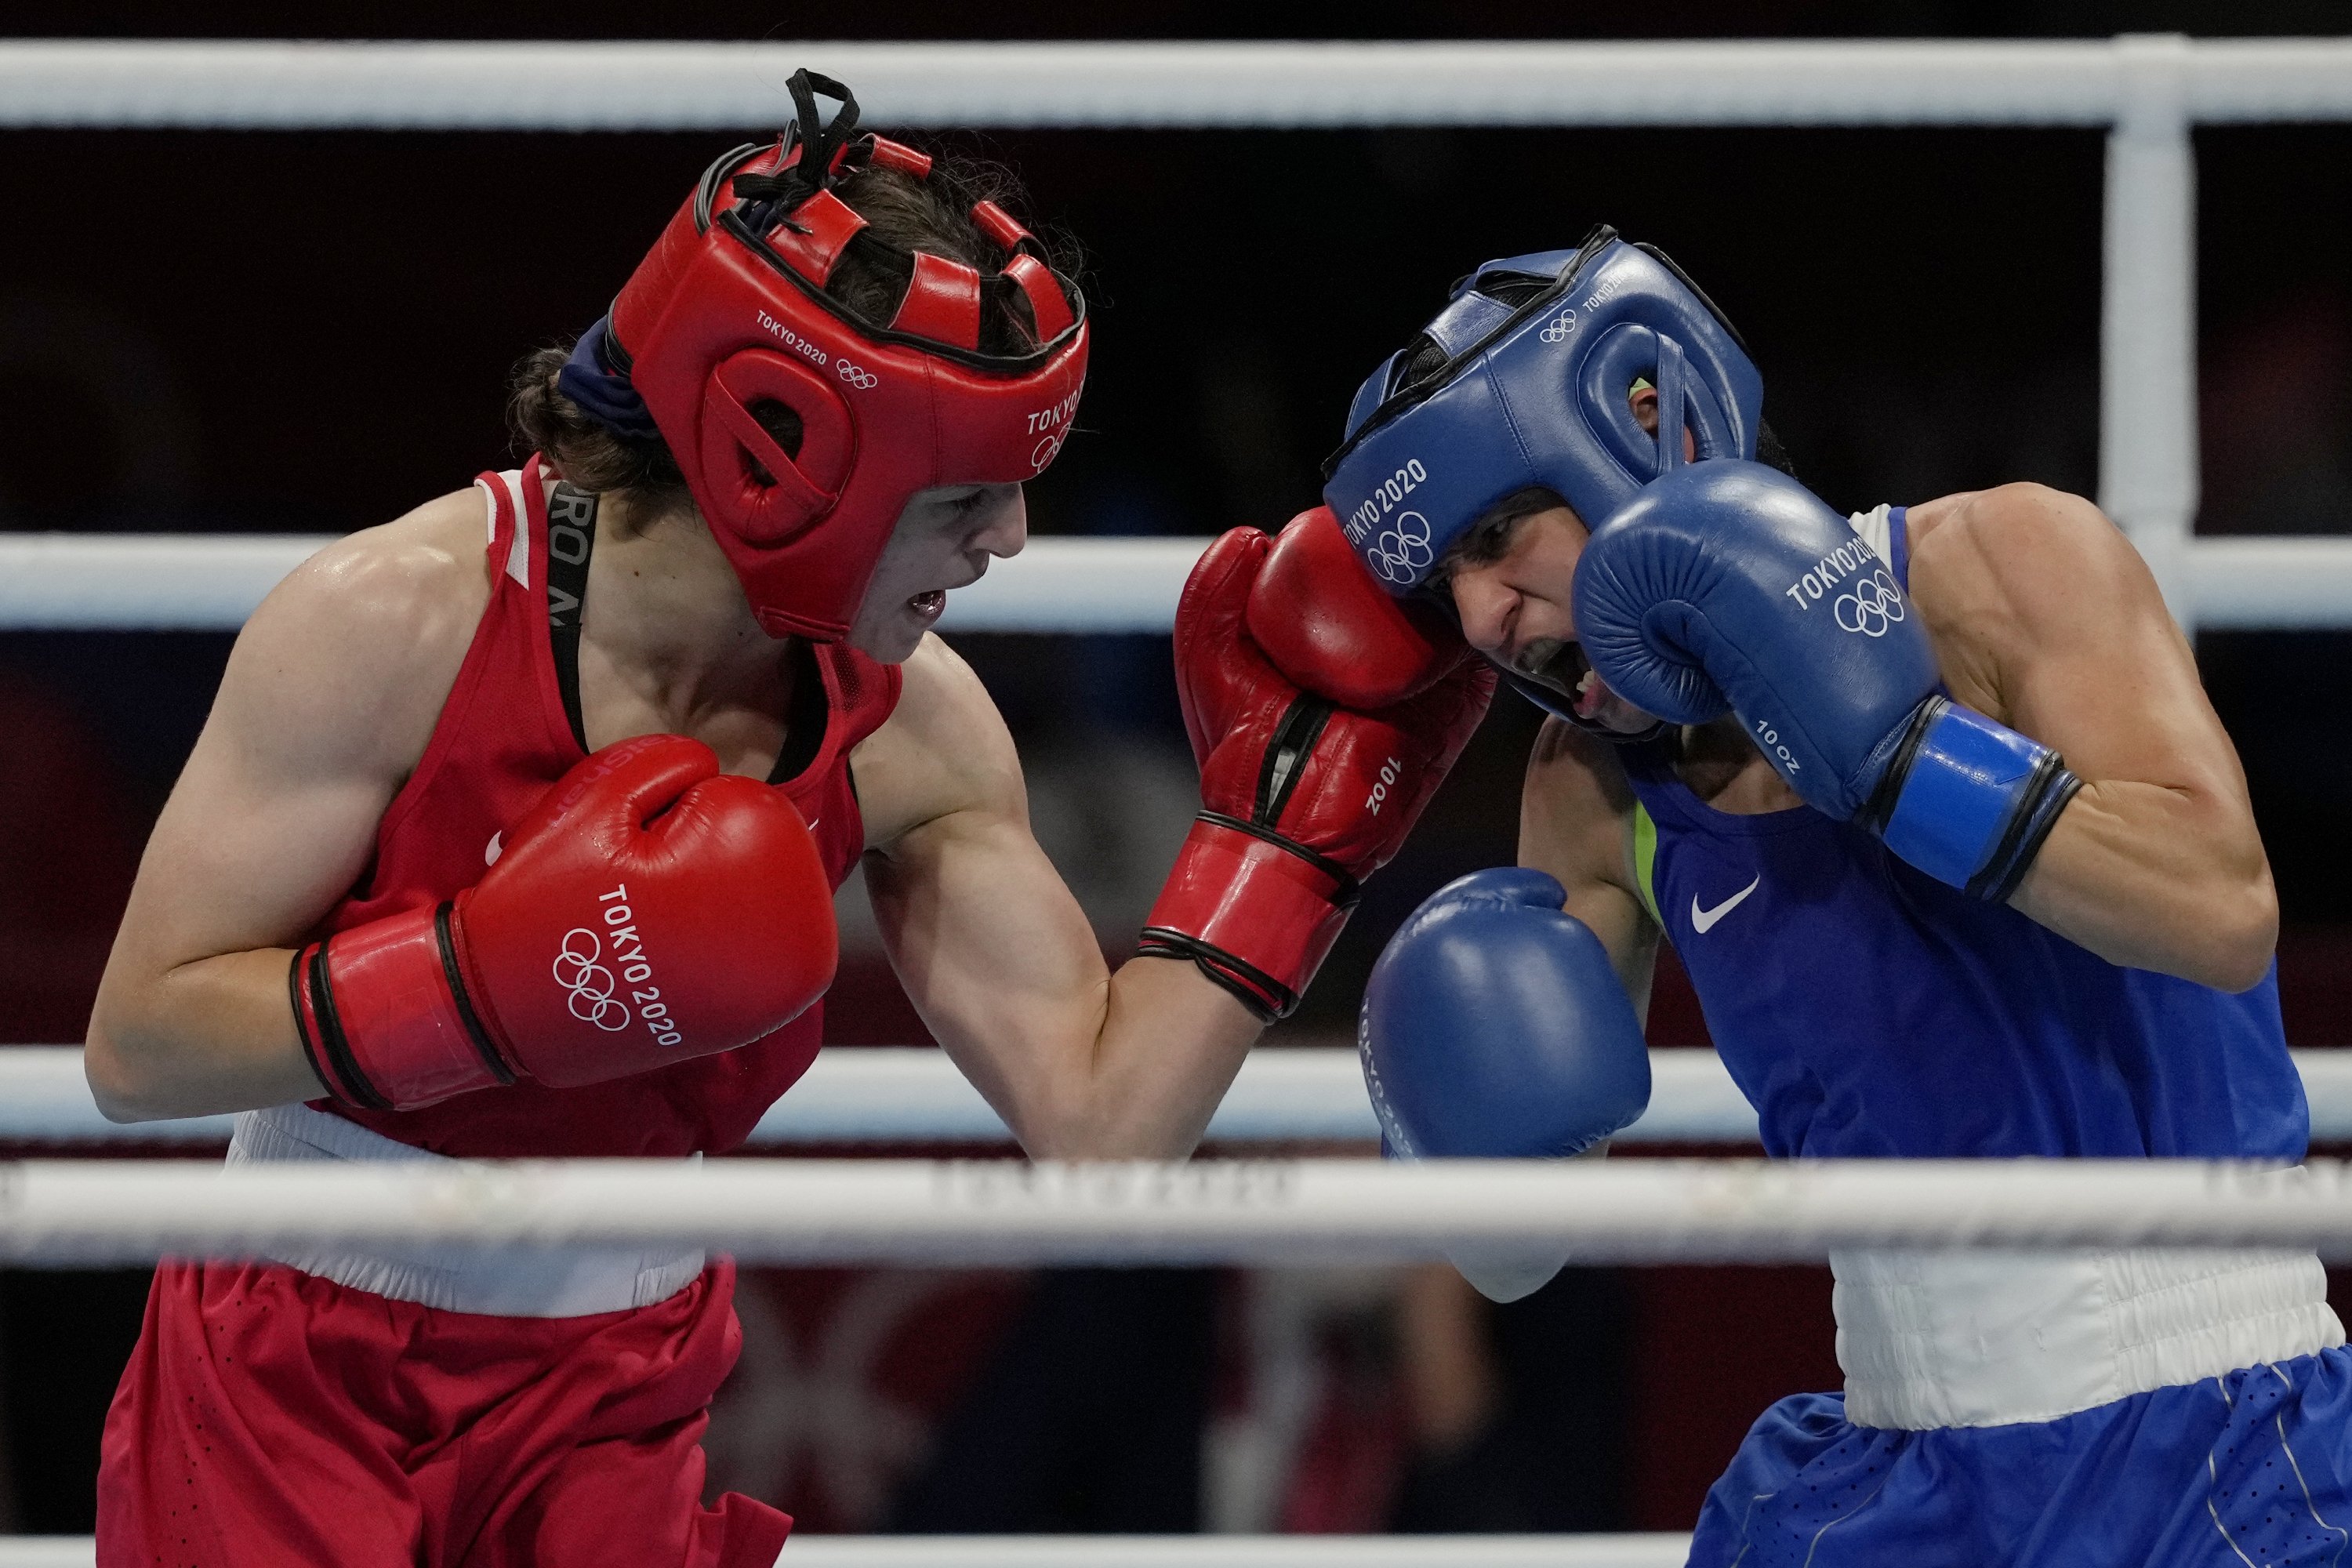 Turkey's Buse Naz Çakıroğlu (L), exchanges punches with Bulgaria's Stoyka Krasteva (R) during their women's flyweight 51-kg boxing gold medal match at the 2020 Summer Olympics, in Tokyo, Japan, Aug. 7, 2021. (AP Photo)